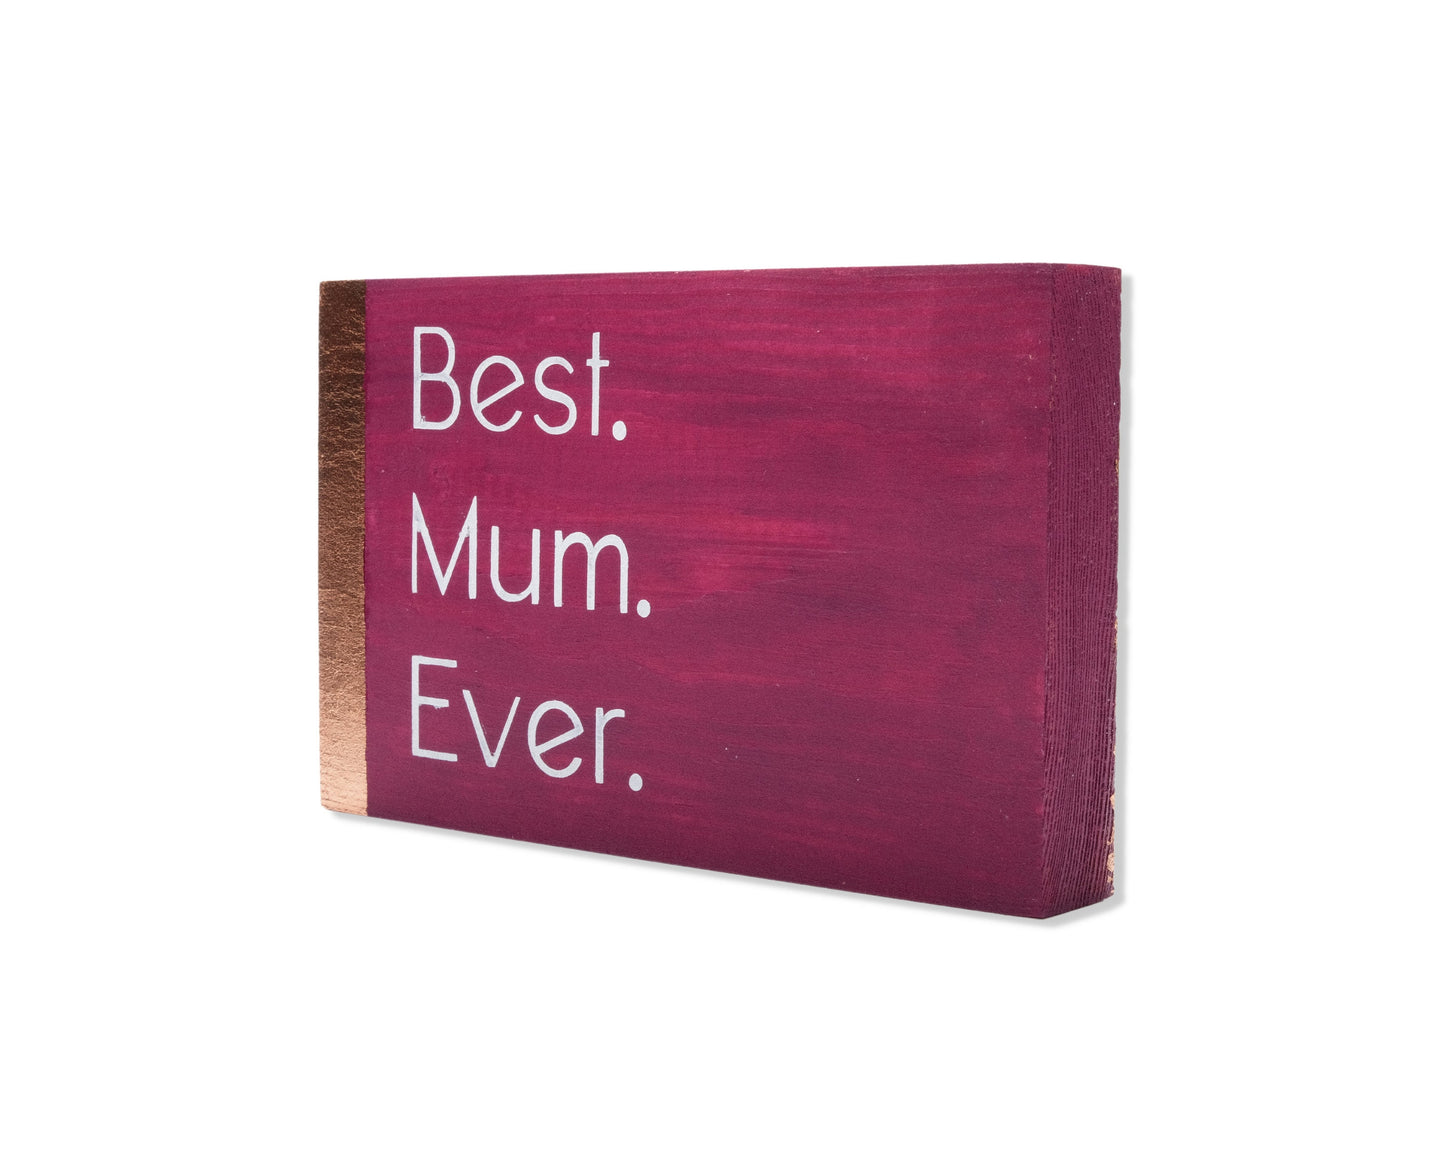 Small freestanding rectangular wooden sign displayed at 35 degree angle to show depth of sign. Magenta color, with bronze rose gold vertical border on left side only. White painted message, Best. Mum. Ever. Studio style photo on white background.